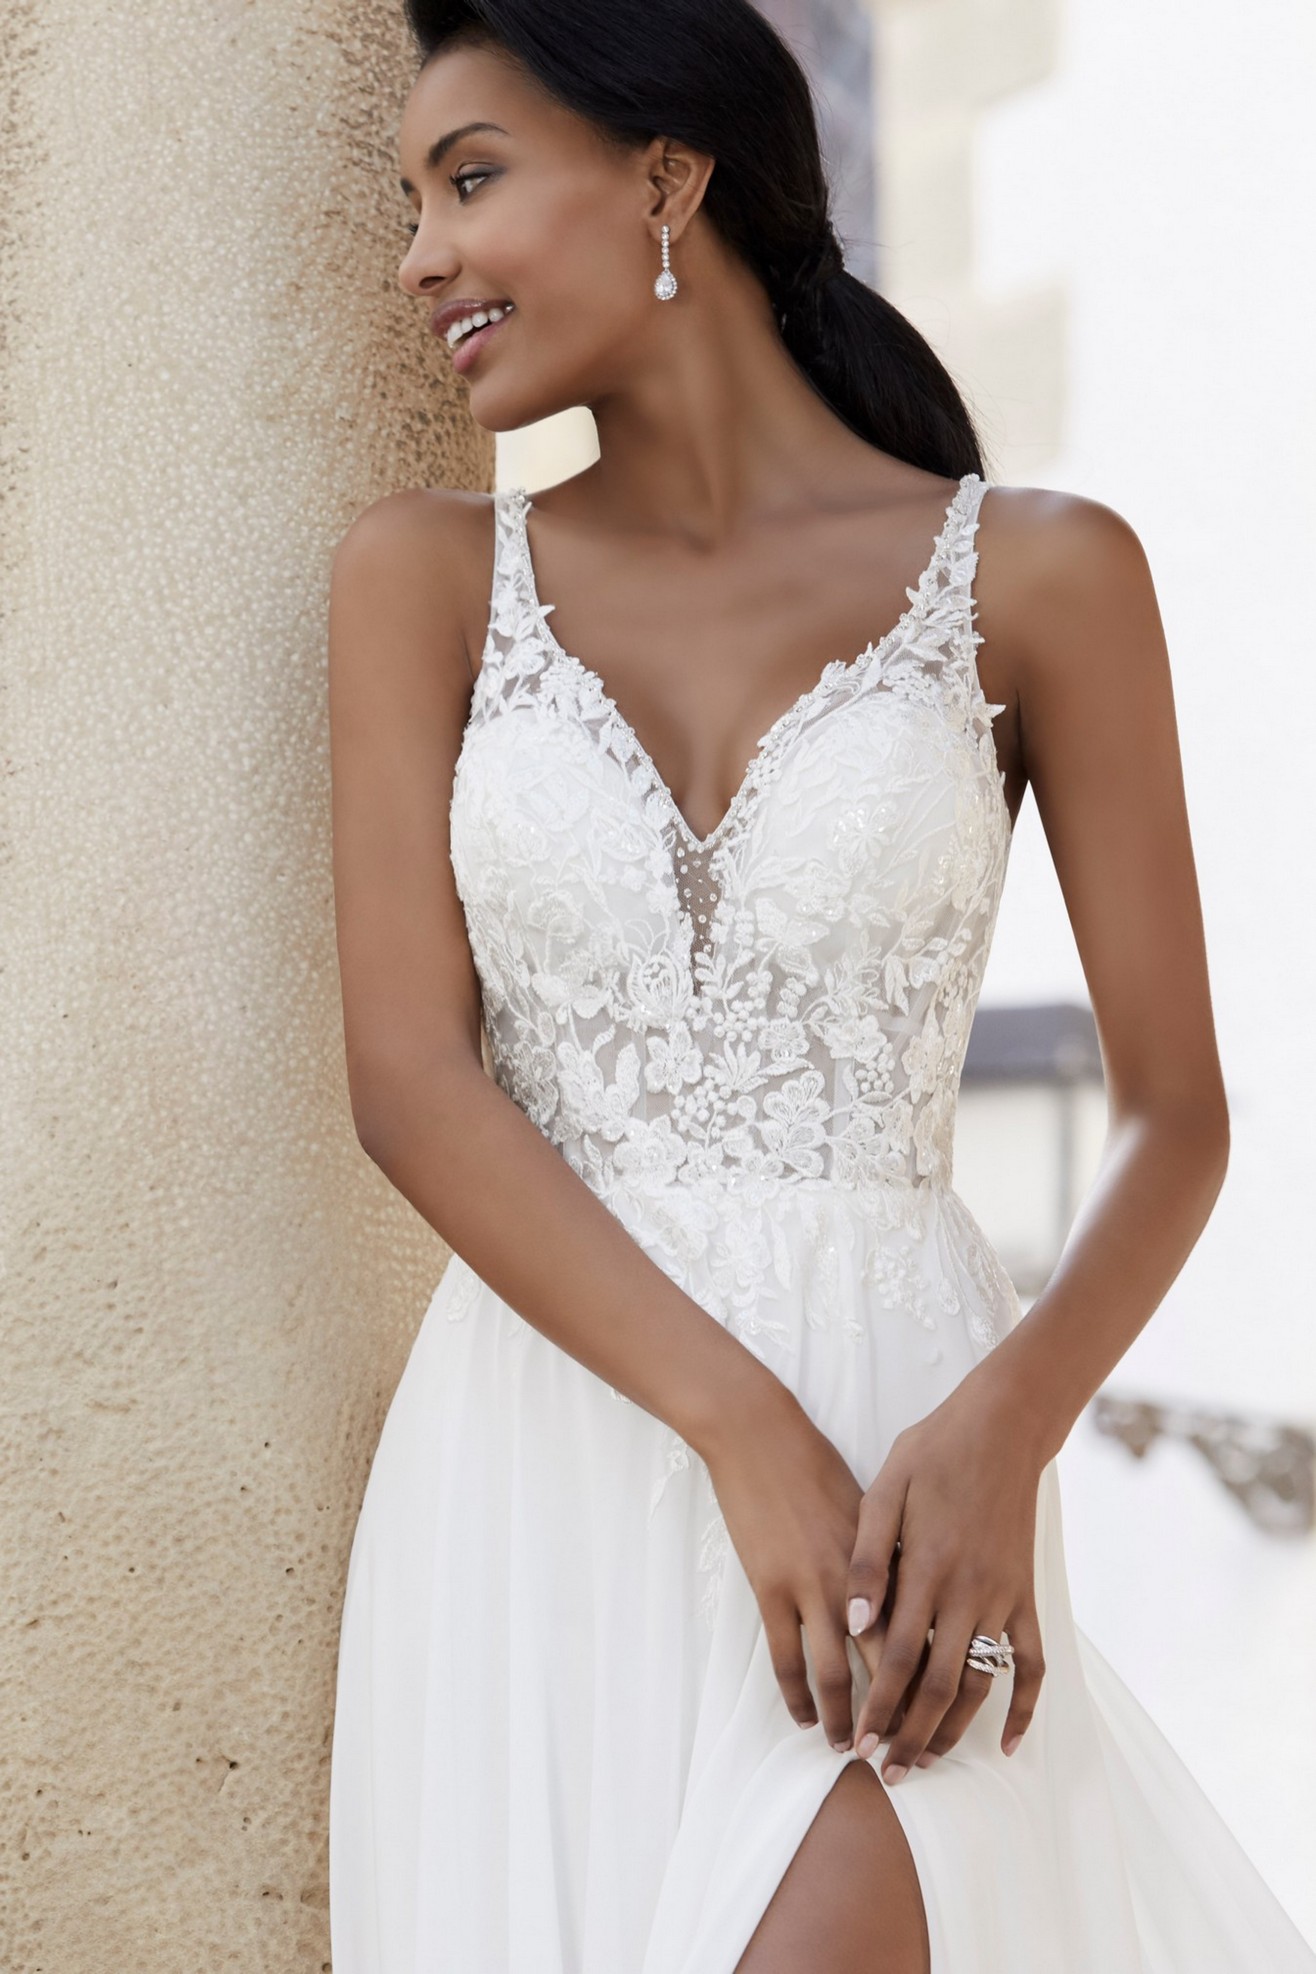 Woman standing smiling next to pillar wearing lace wedding dress with v-neckline and thigh split detail